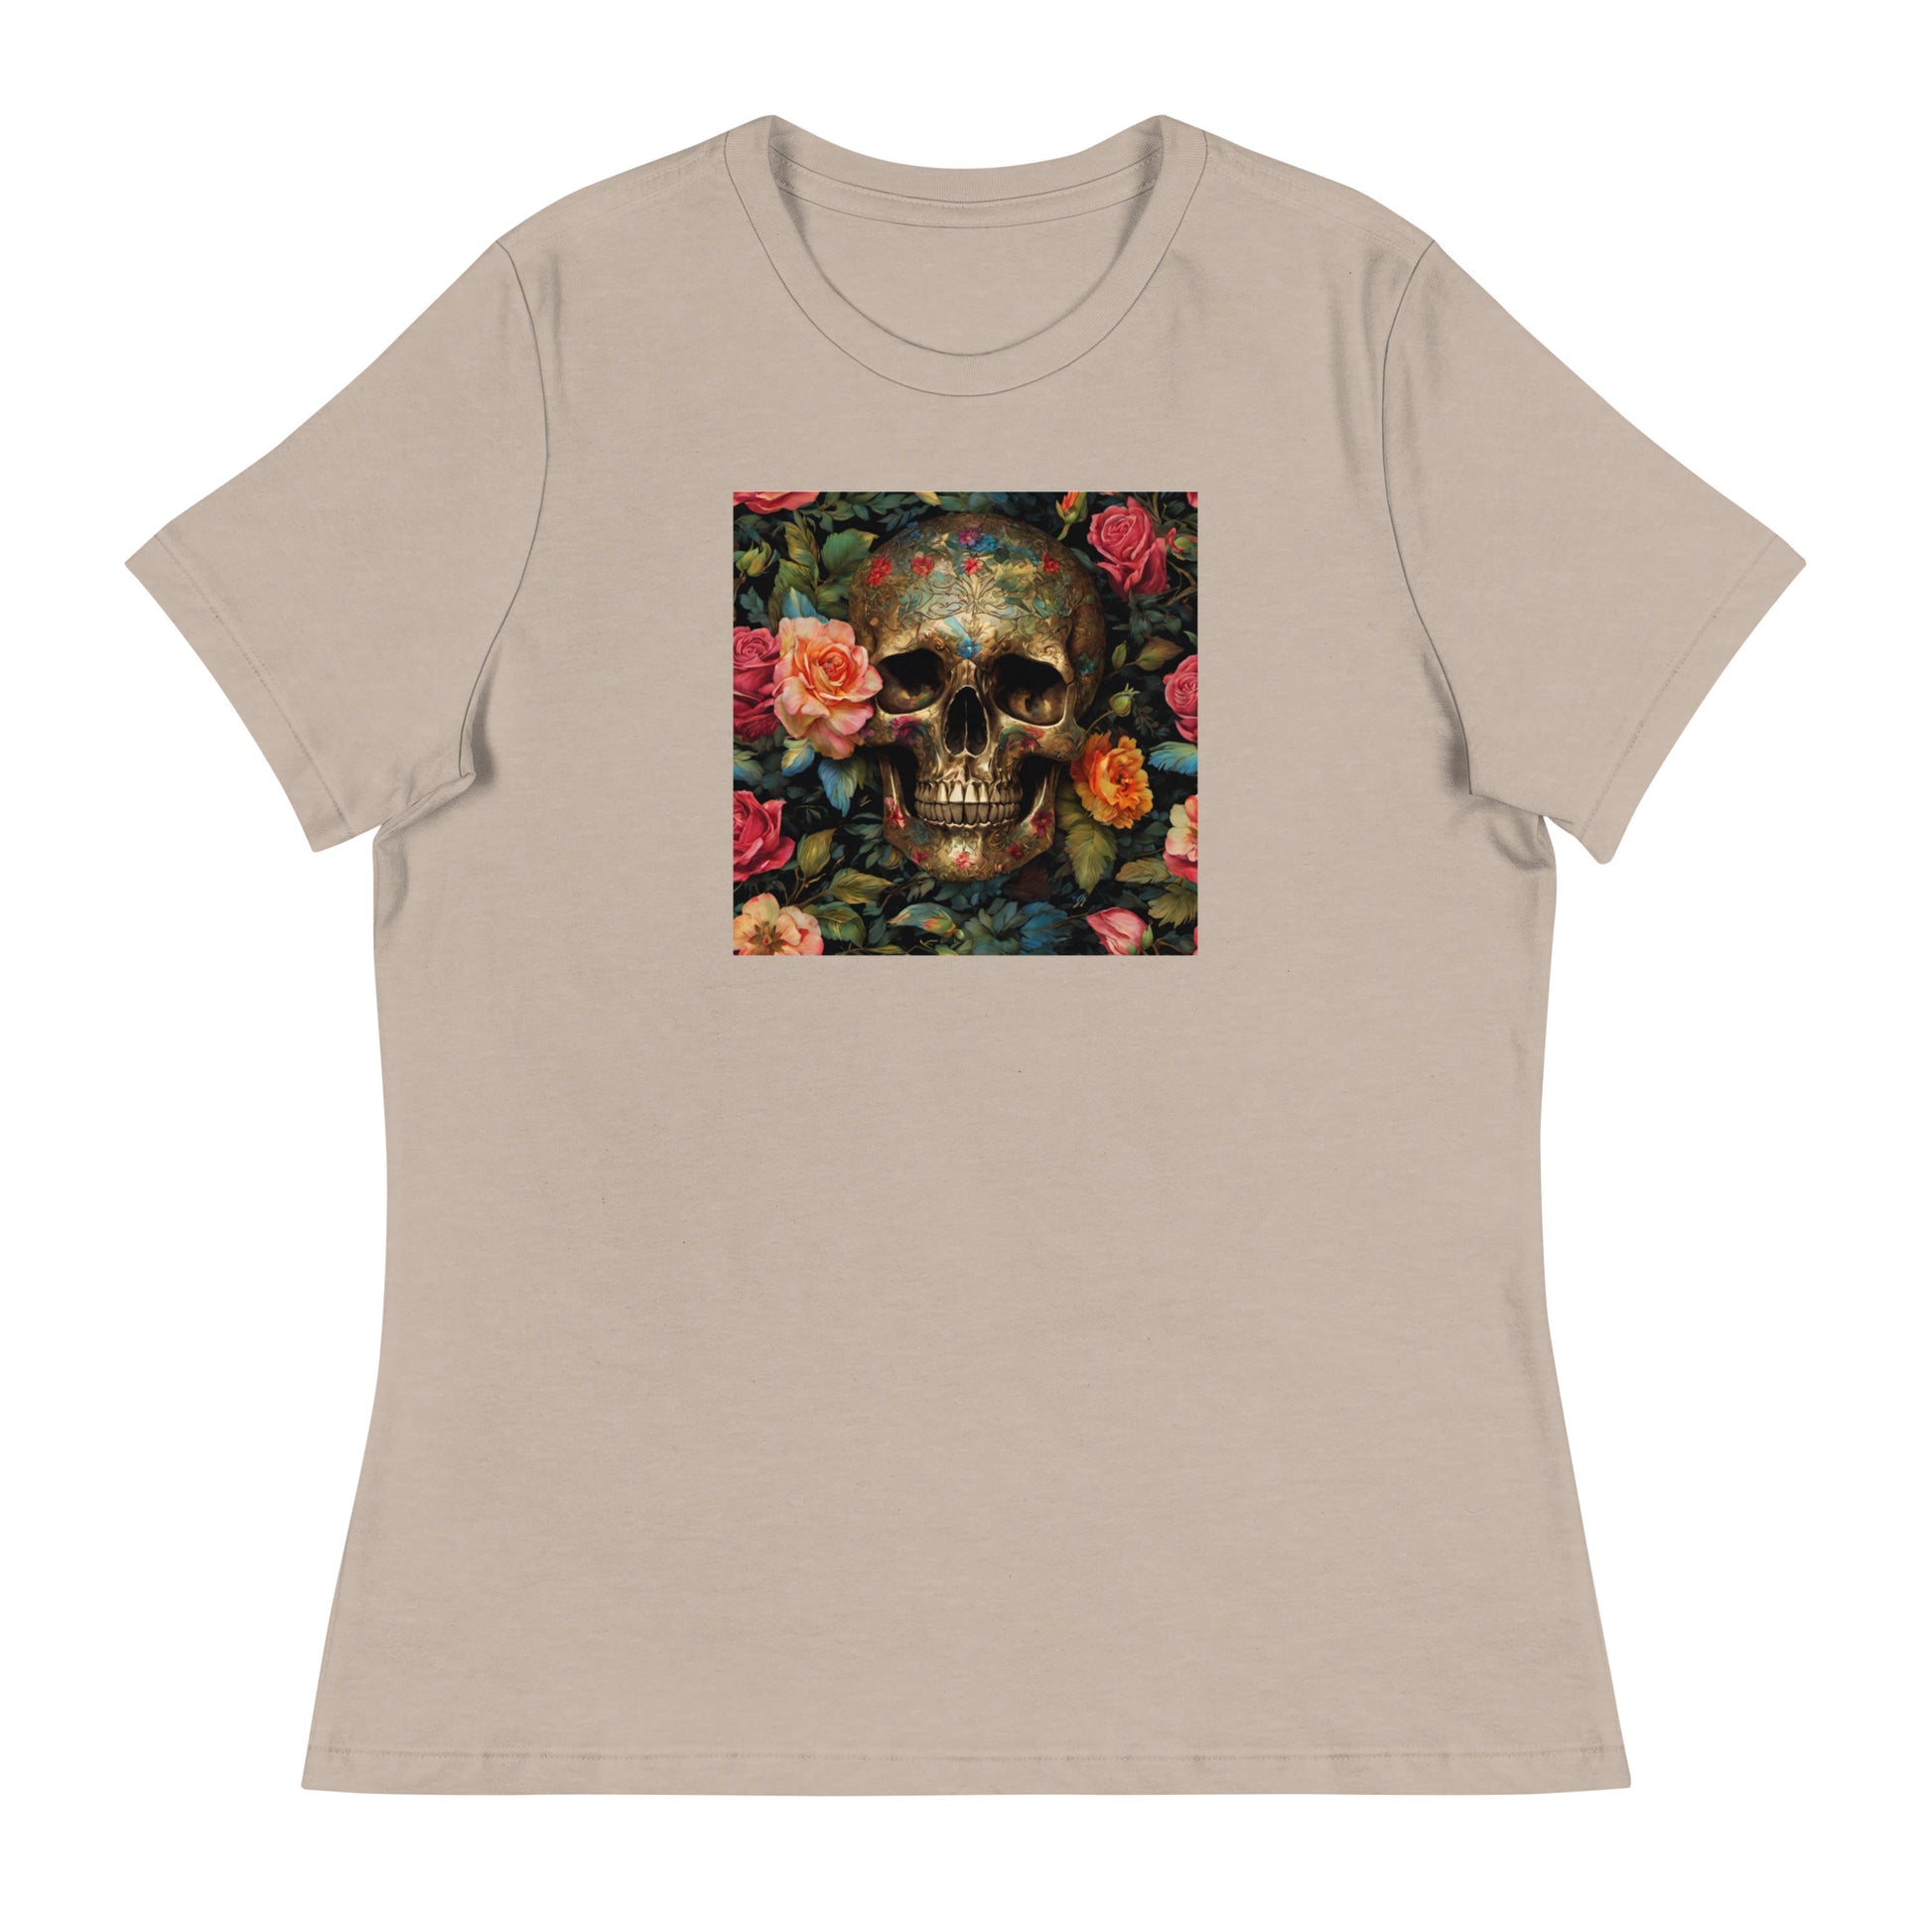 Skull and Roses Graphic Women's T-Shirt Heather Stone